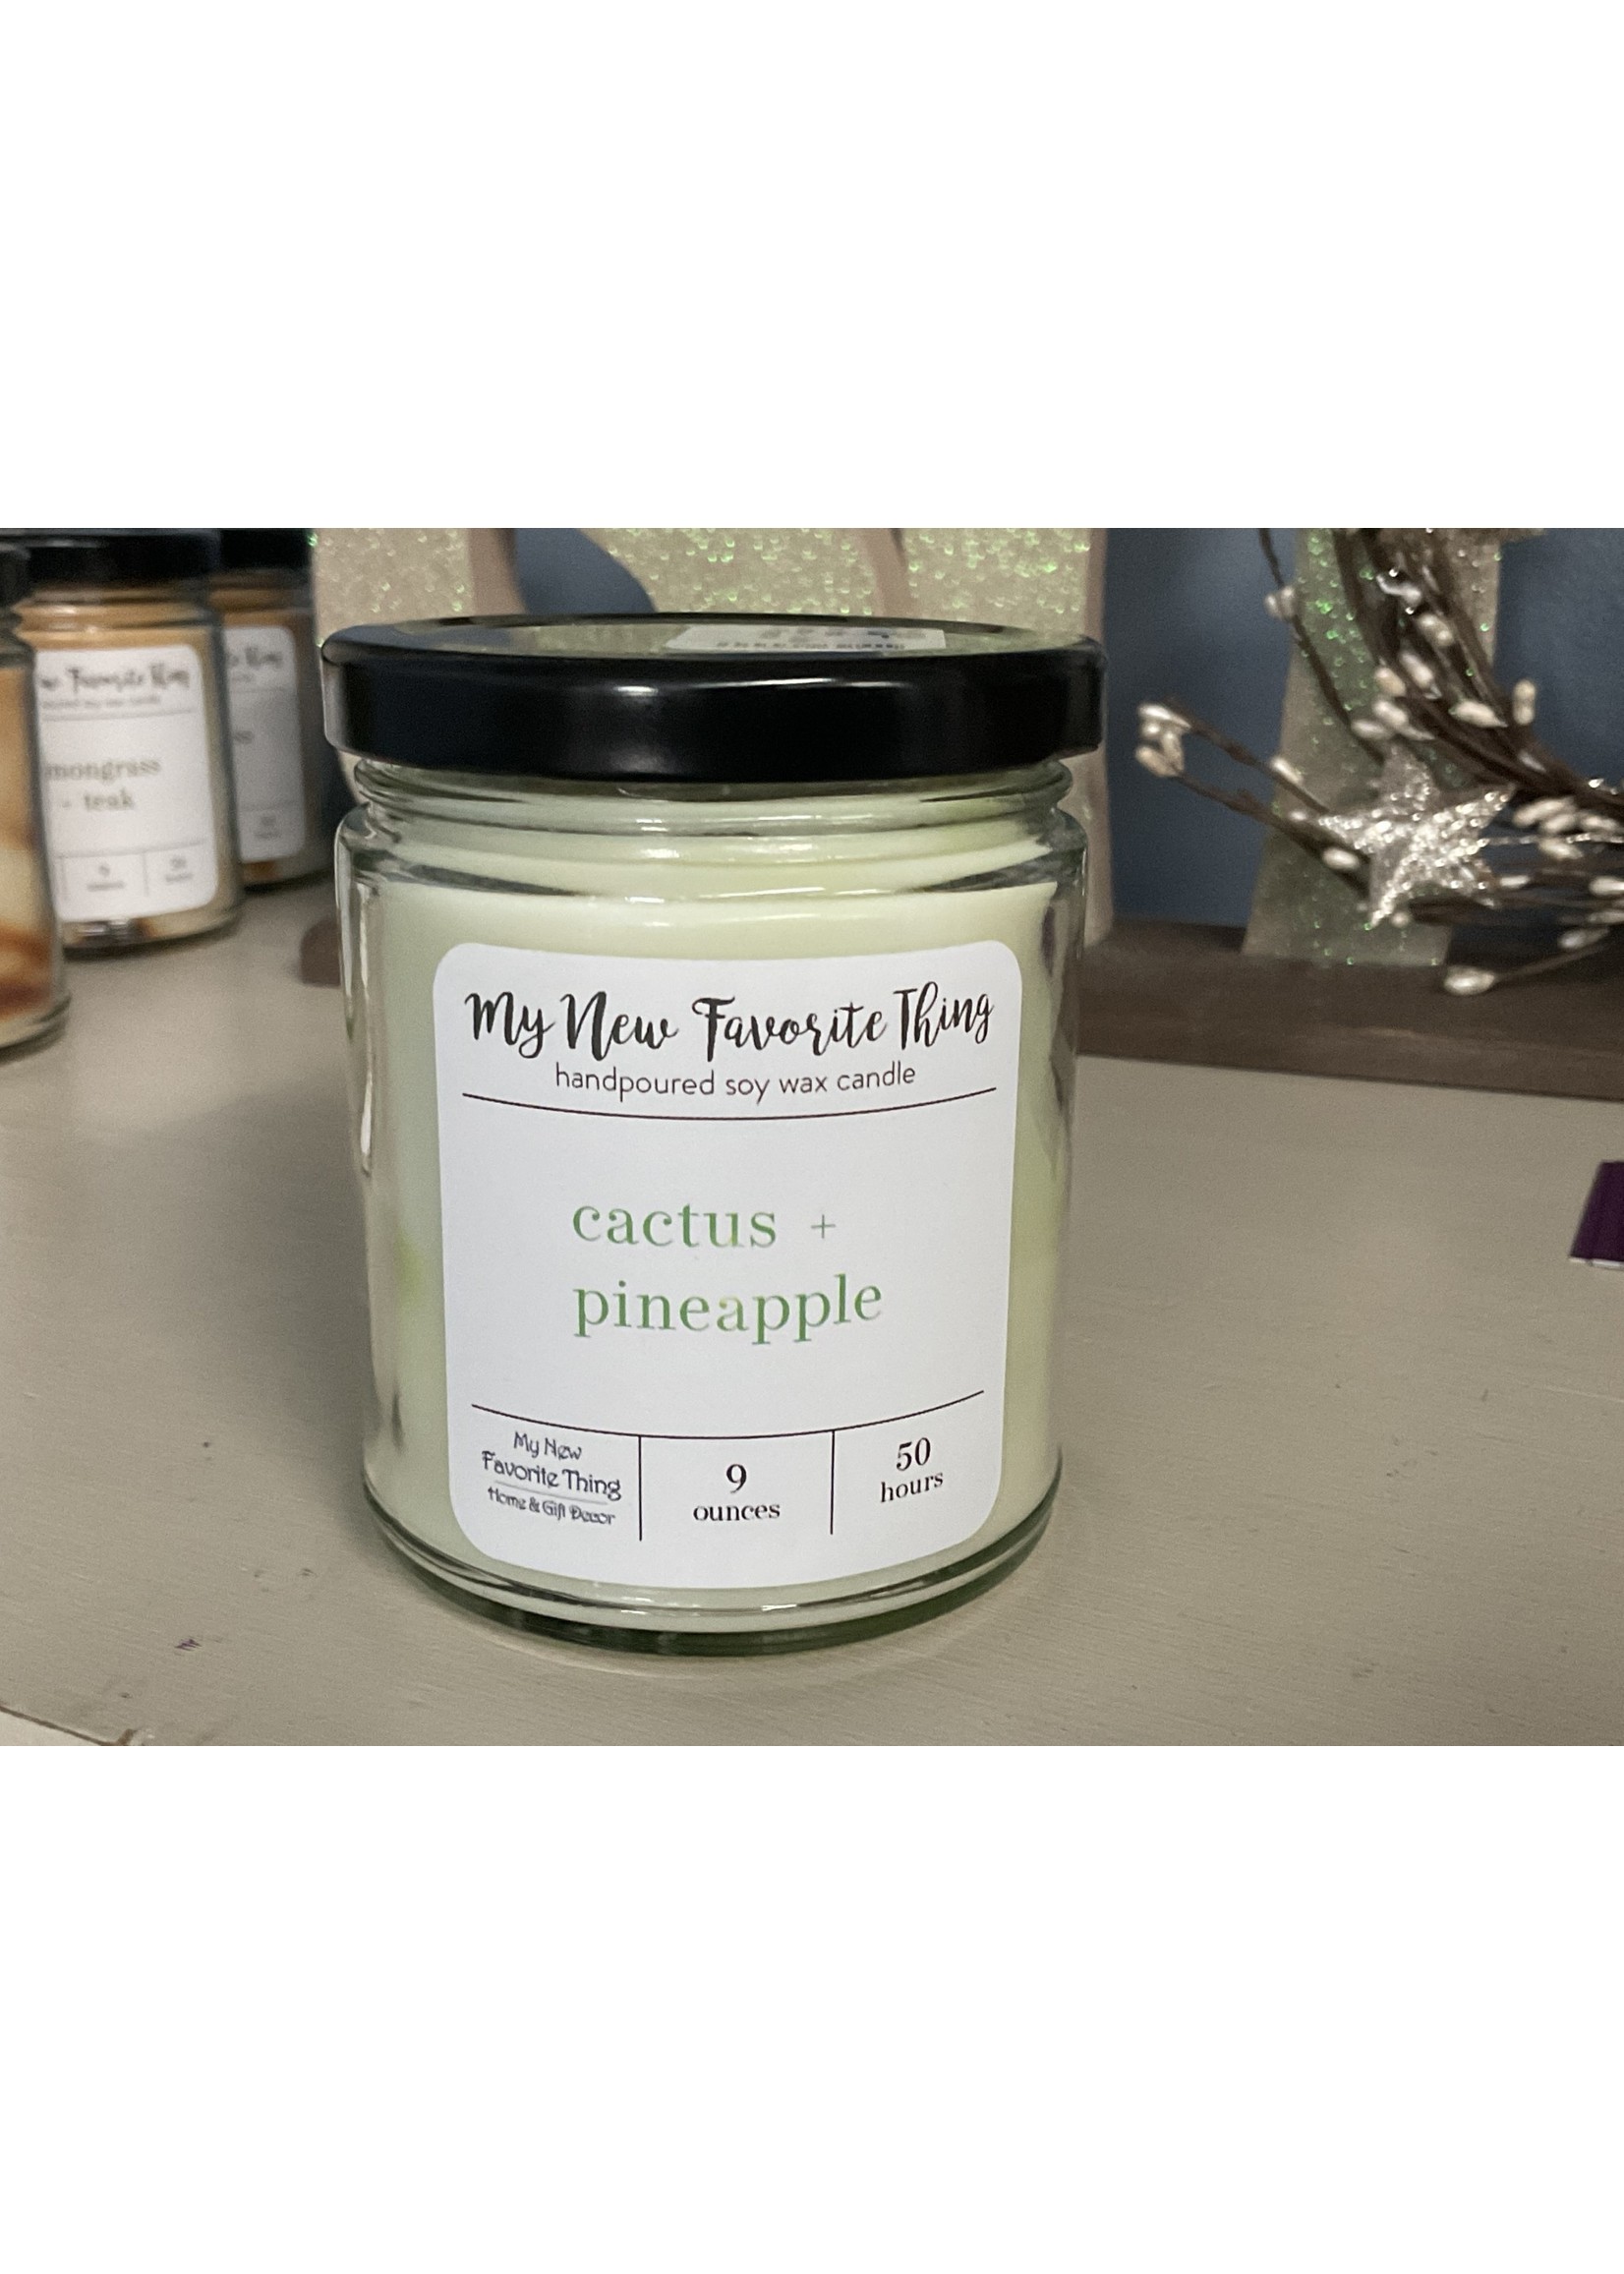 MI Made Coyer Candle Co. Soy Wax Candle- Cactus + Pineapple